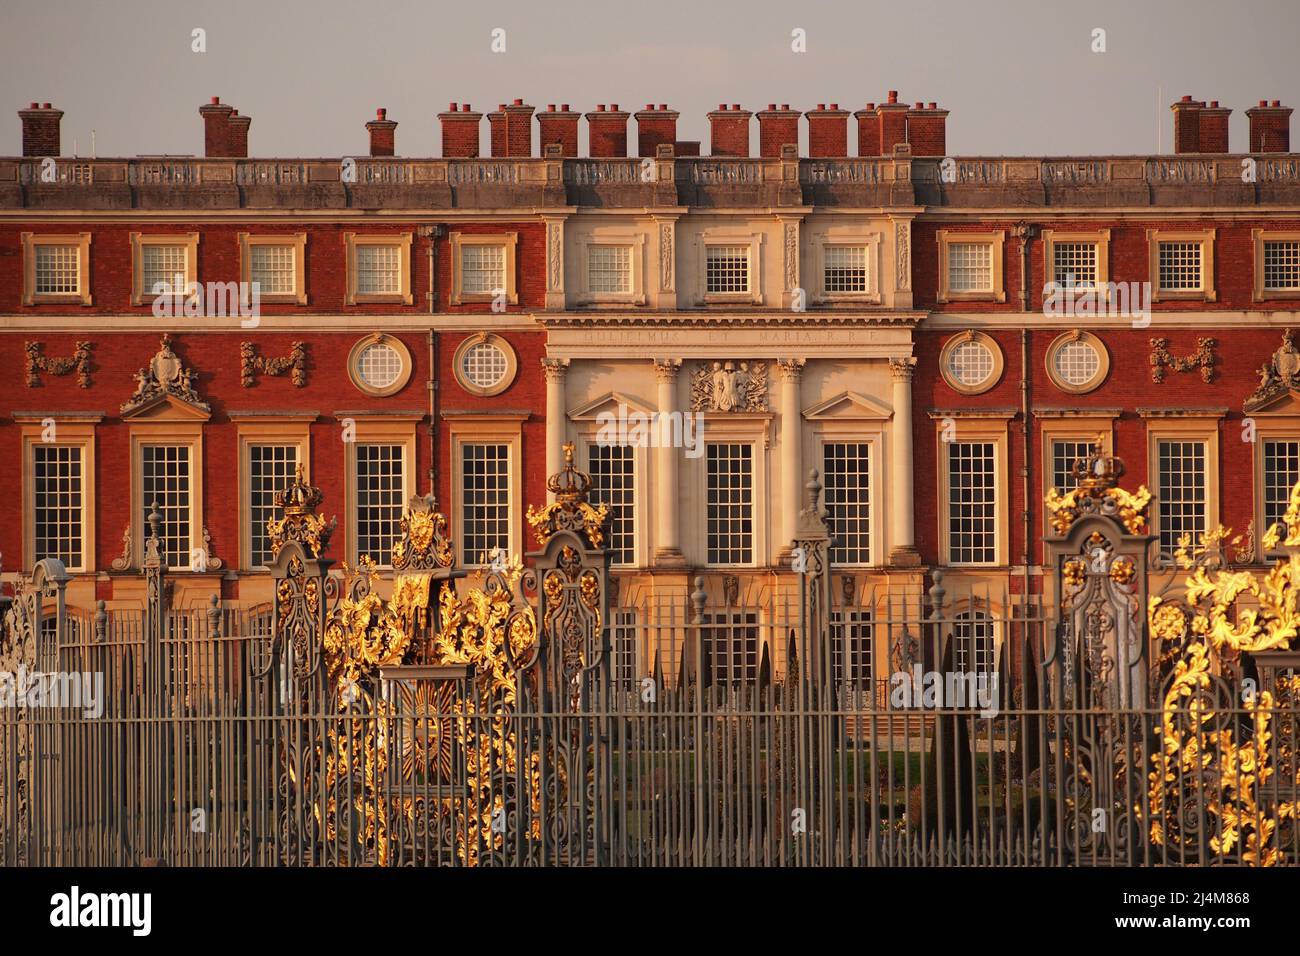 A view the red brick, ornate chimneys, walls, windows and railings of Hampton Court Palace, London, Surrey, England, the home of King Henry VIII Stock Photo